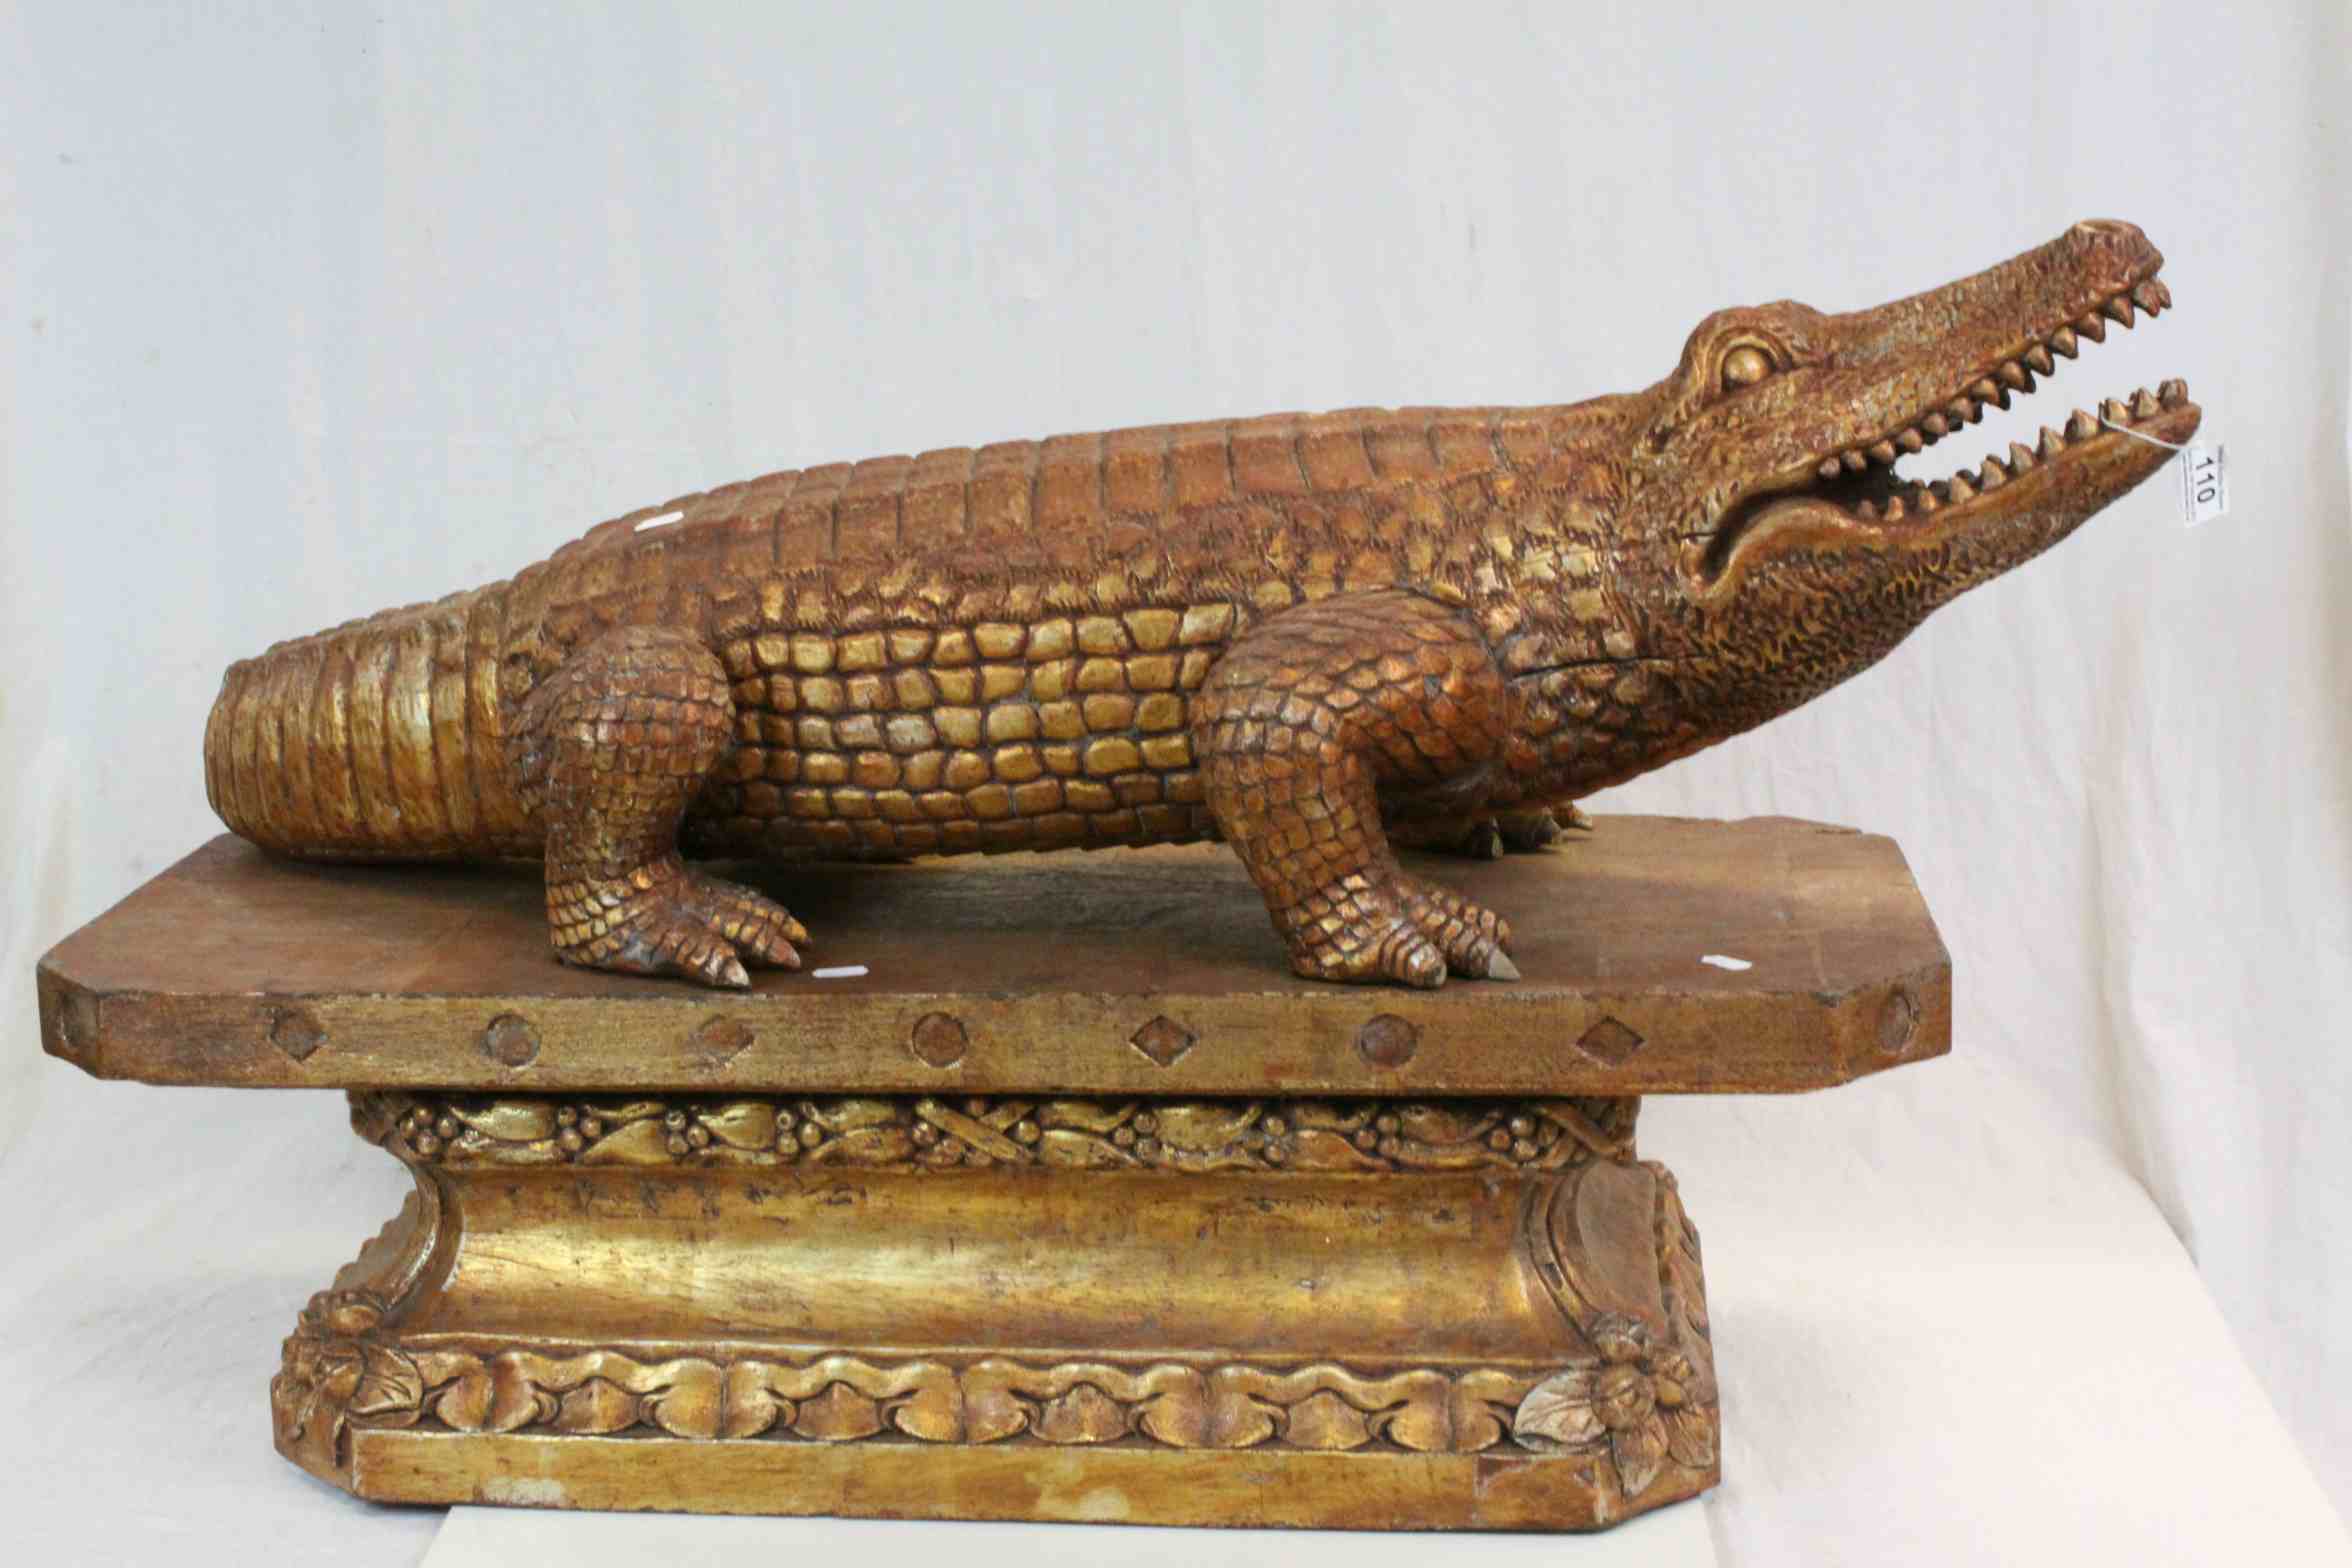 Large Asian carved Wooden model of a Crocodile with matching Hardwood plinth type stand with slots